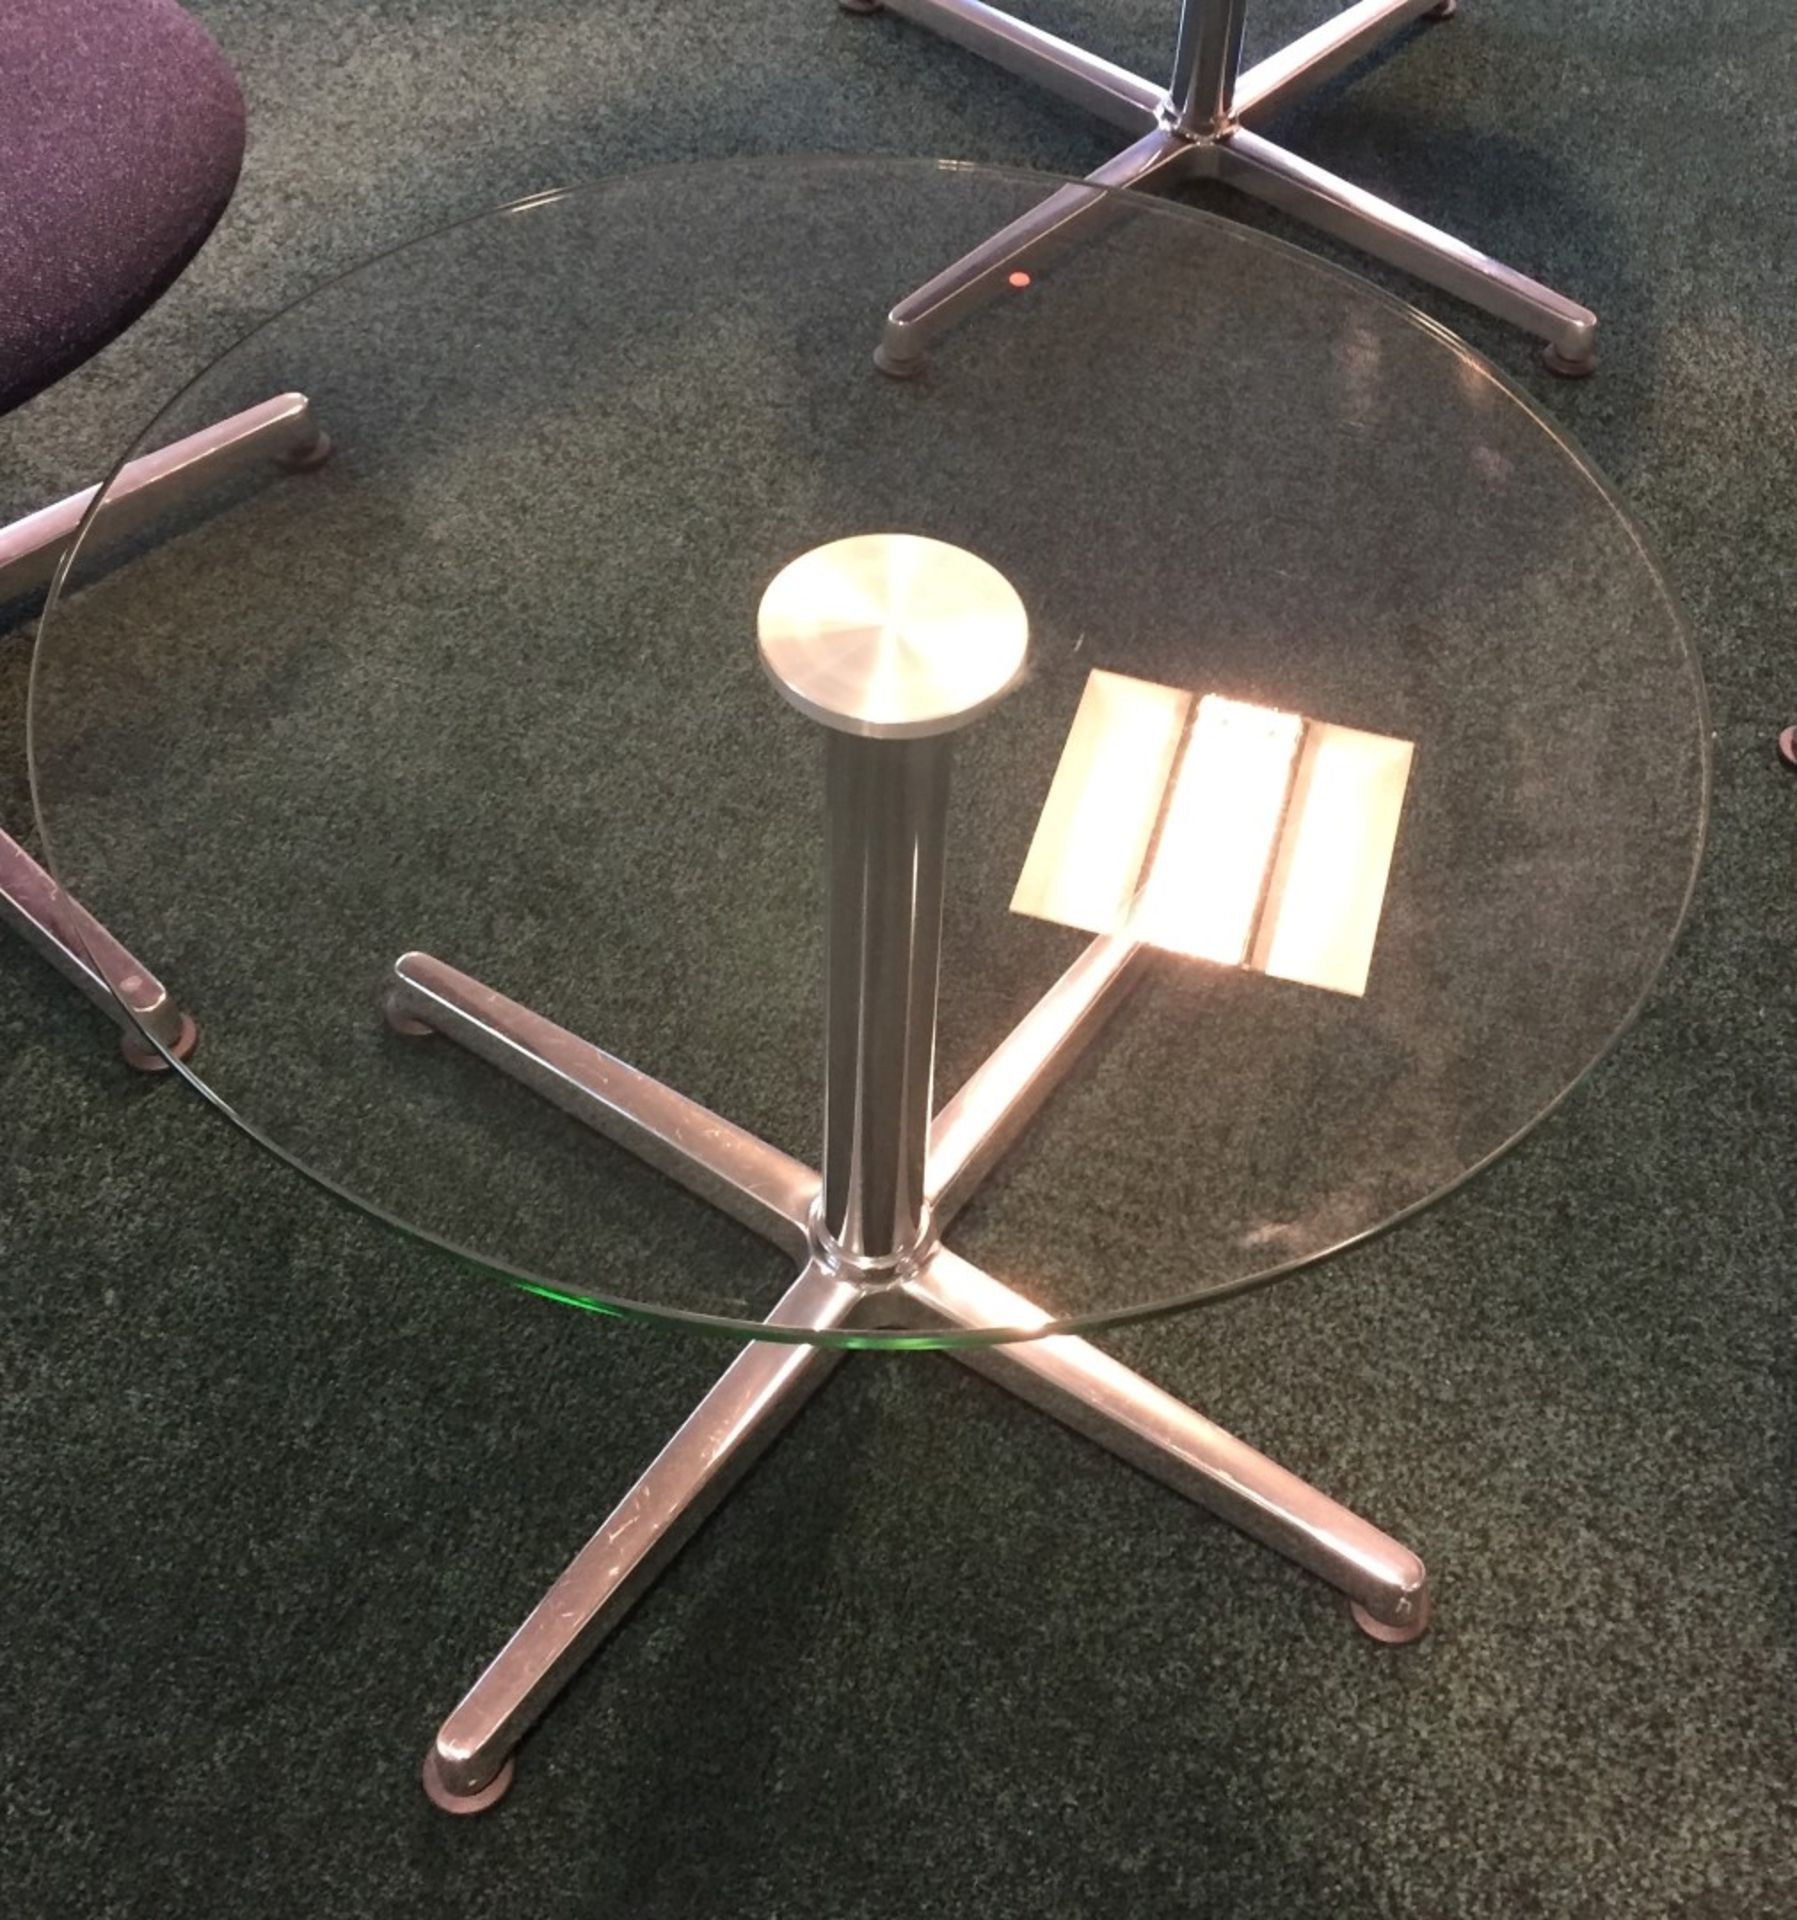 1 x Modern Coffee Table Featuring a Thick Round Glass Surface and Cross Feet Chrome Base - Premium - Image 3 of 3